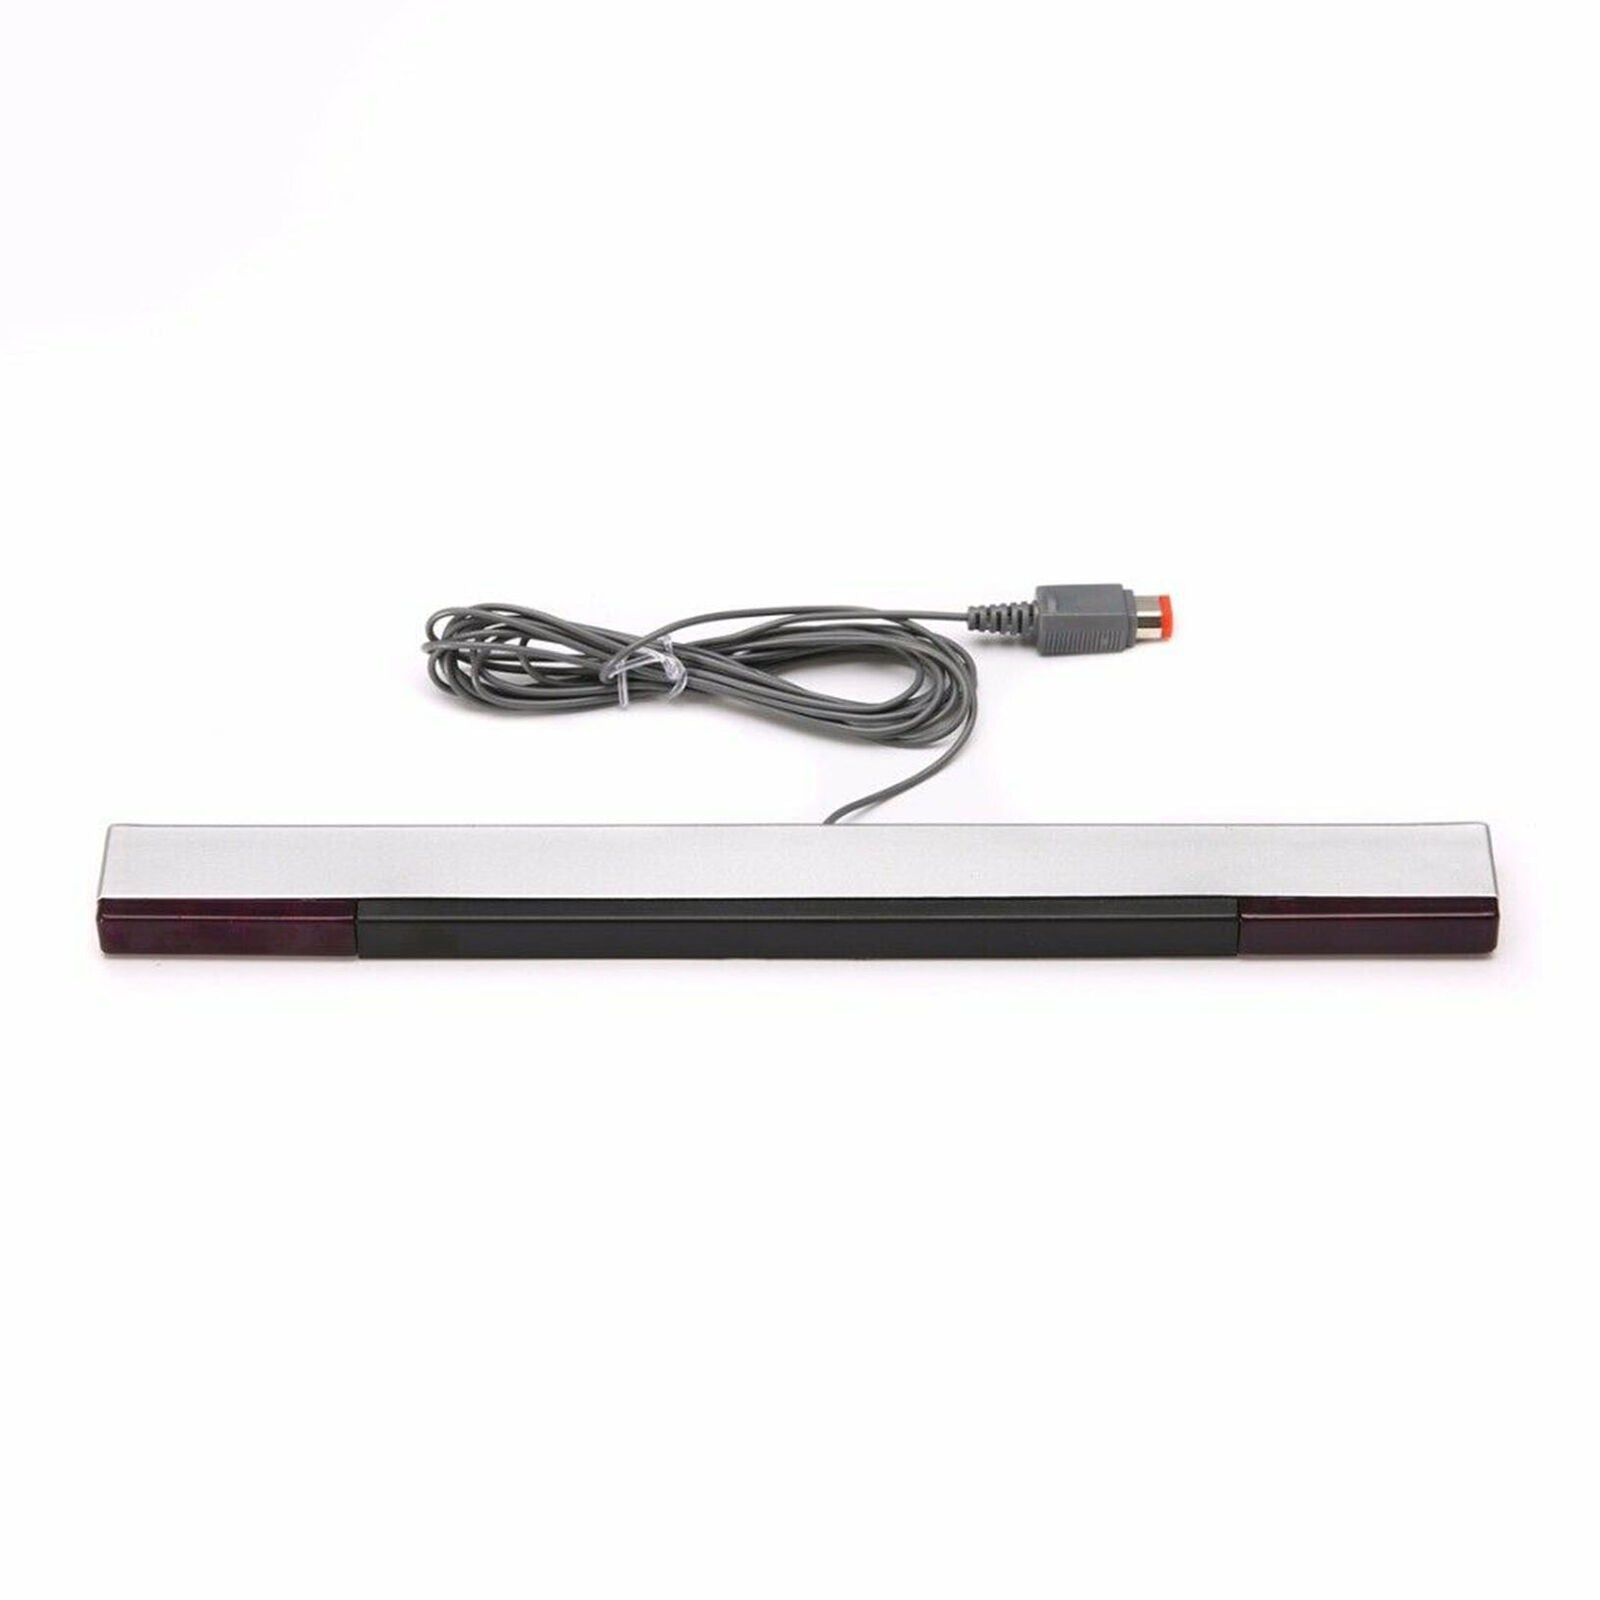 Wired TV Receiver Ray Sensor Bar Motion Detector for Nintendo Wii /Wii U console